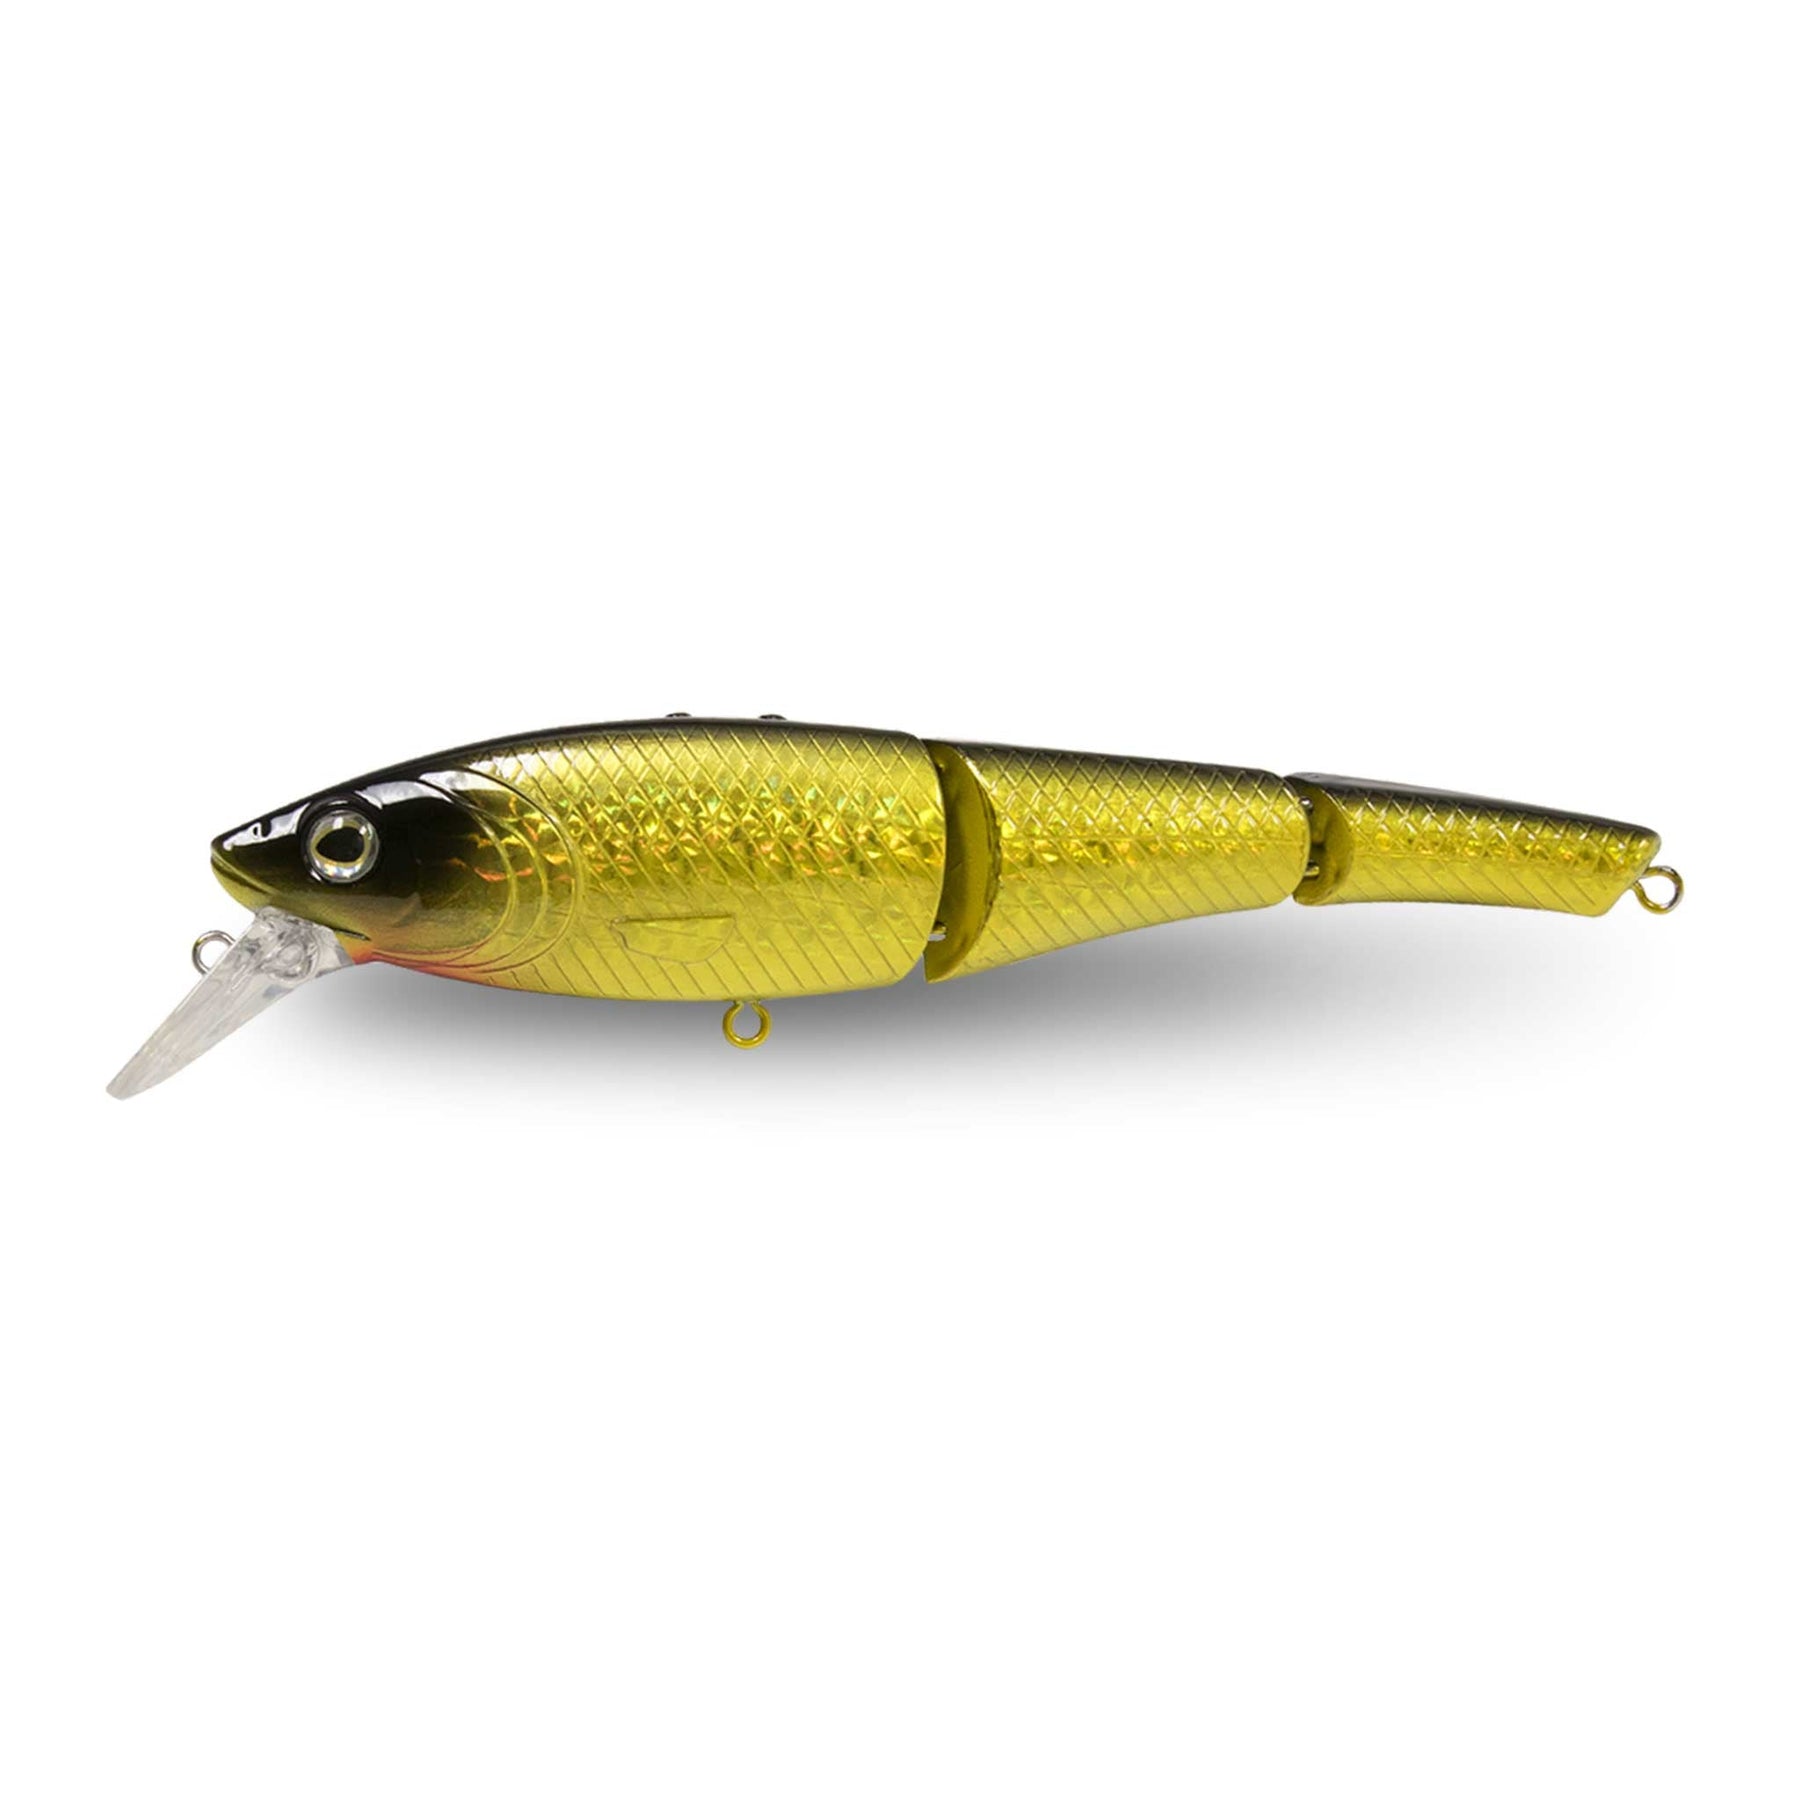 New, Super Cool Double Jointed Wood Musky Muskie Crankbait Lure